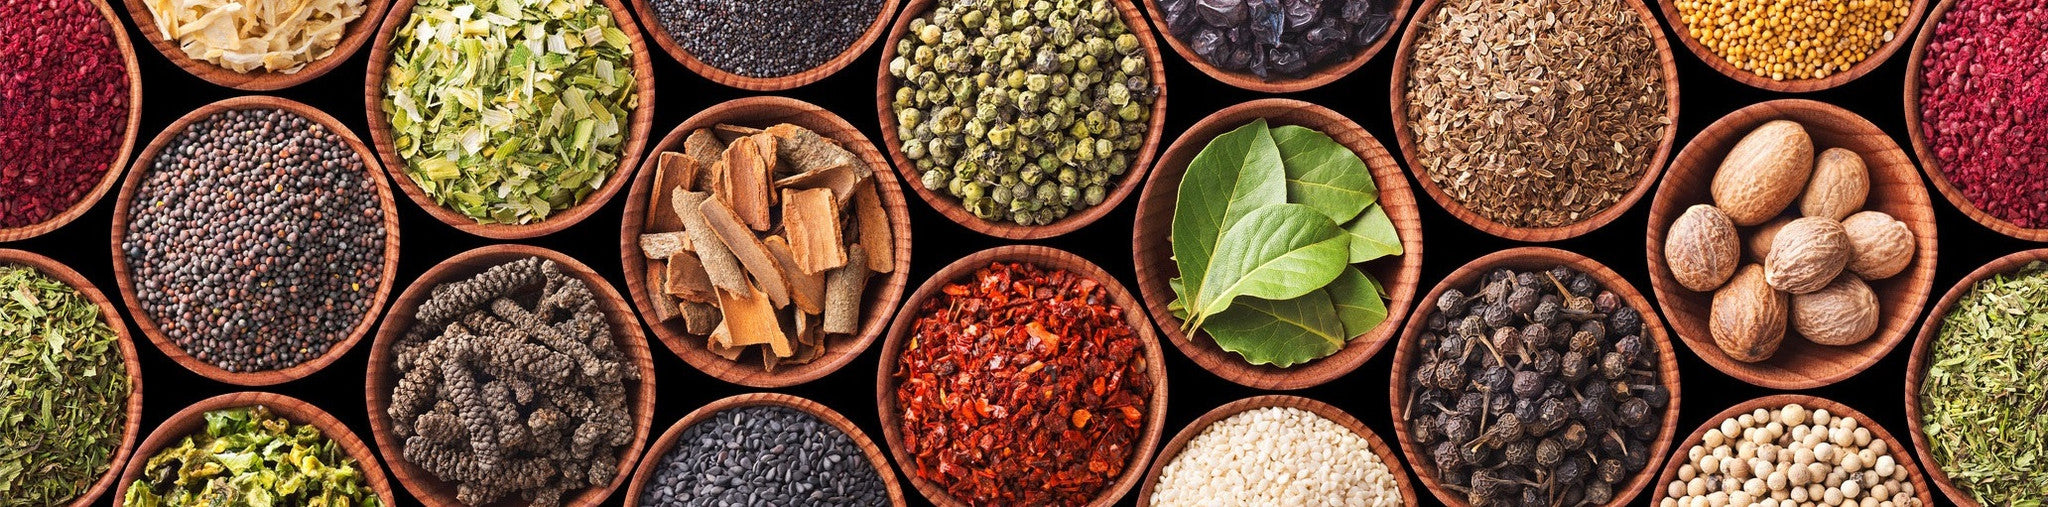 Spices and Blends